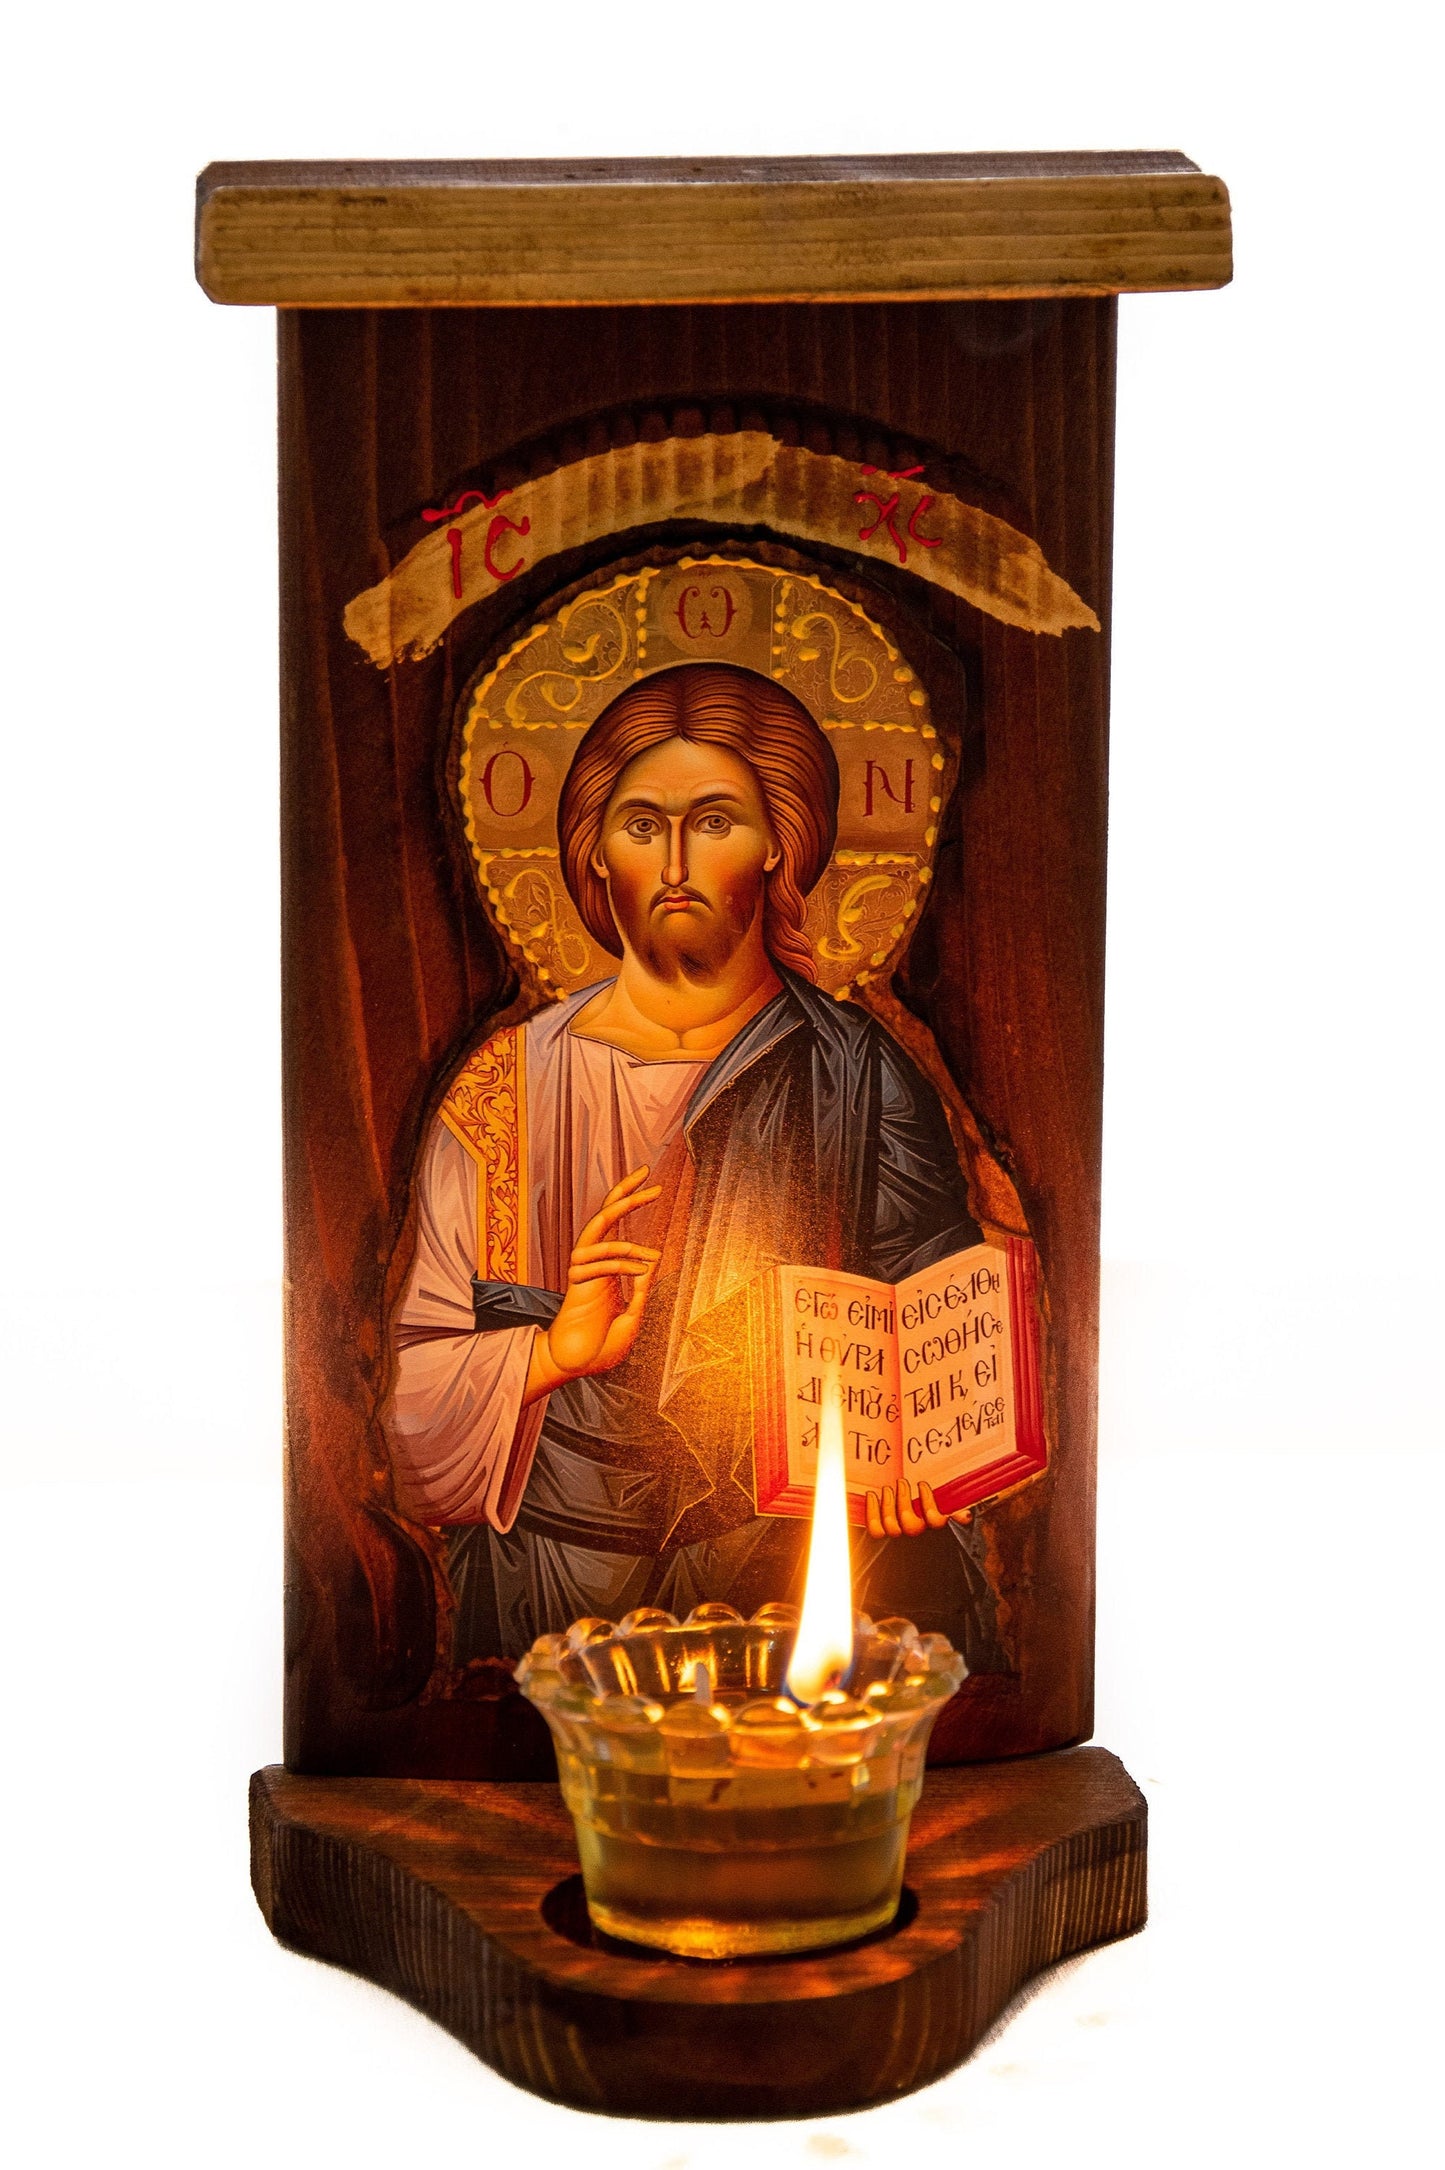 Christian Iconostasis with Jesus Christ icon Handmade Mount Athos Orthodox shrine w/ Our Lord Byzantine altar wall hanging wood plaque icon TheHolyArt